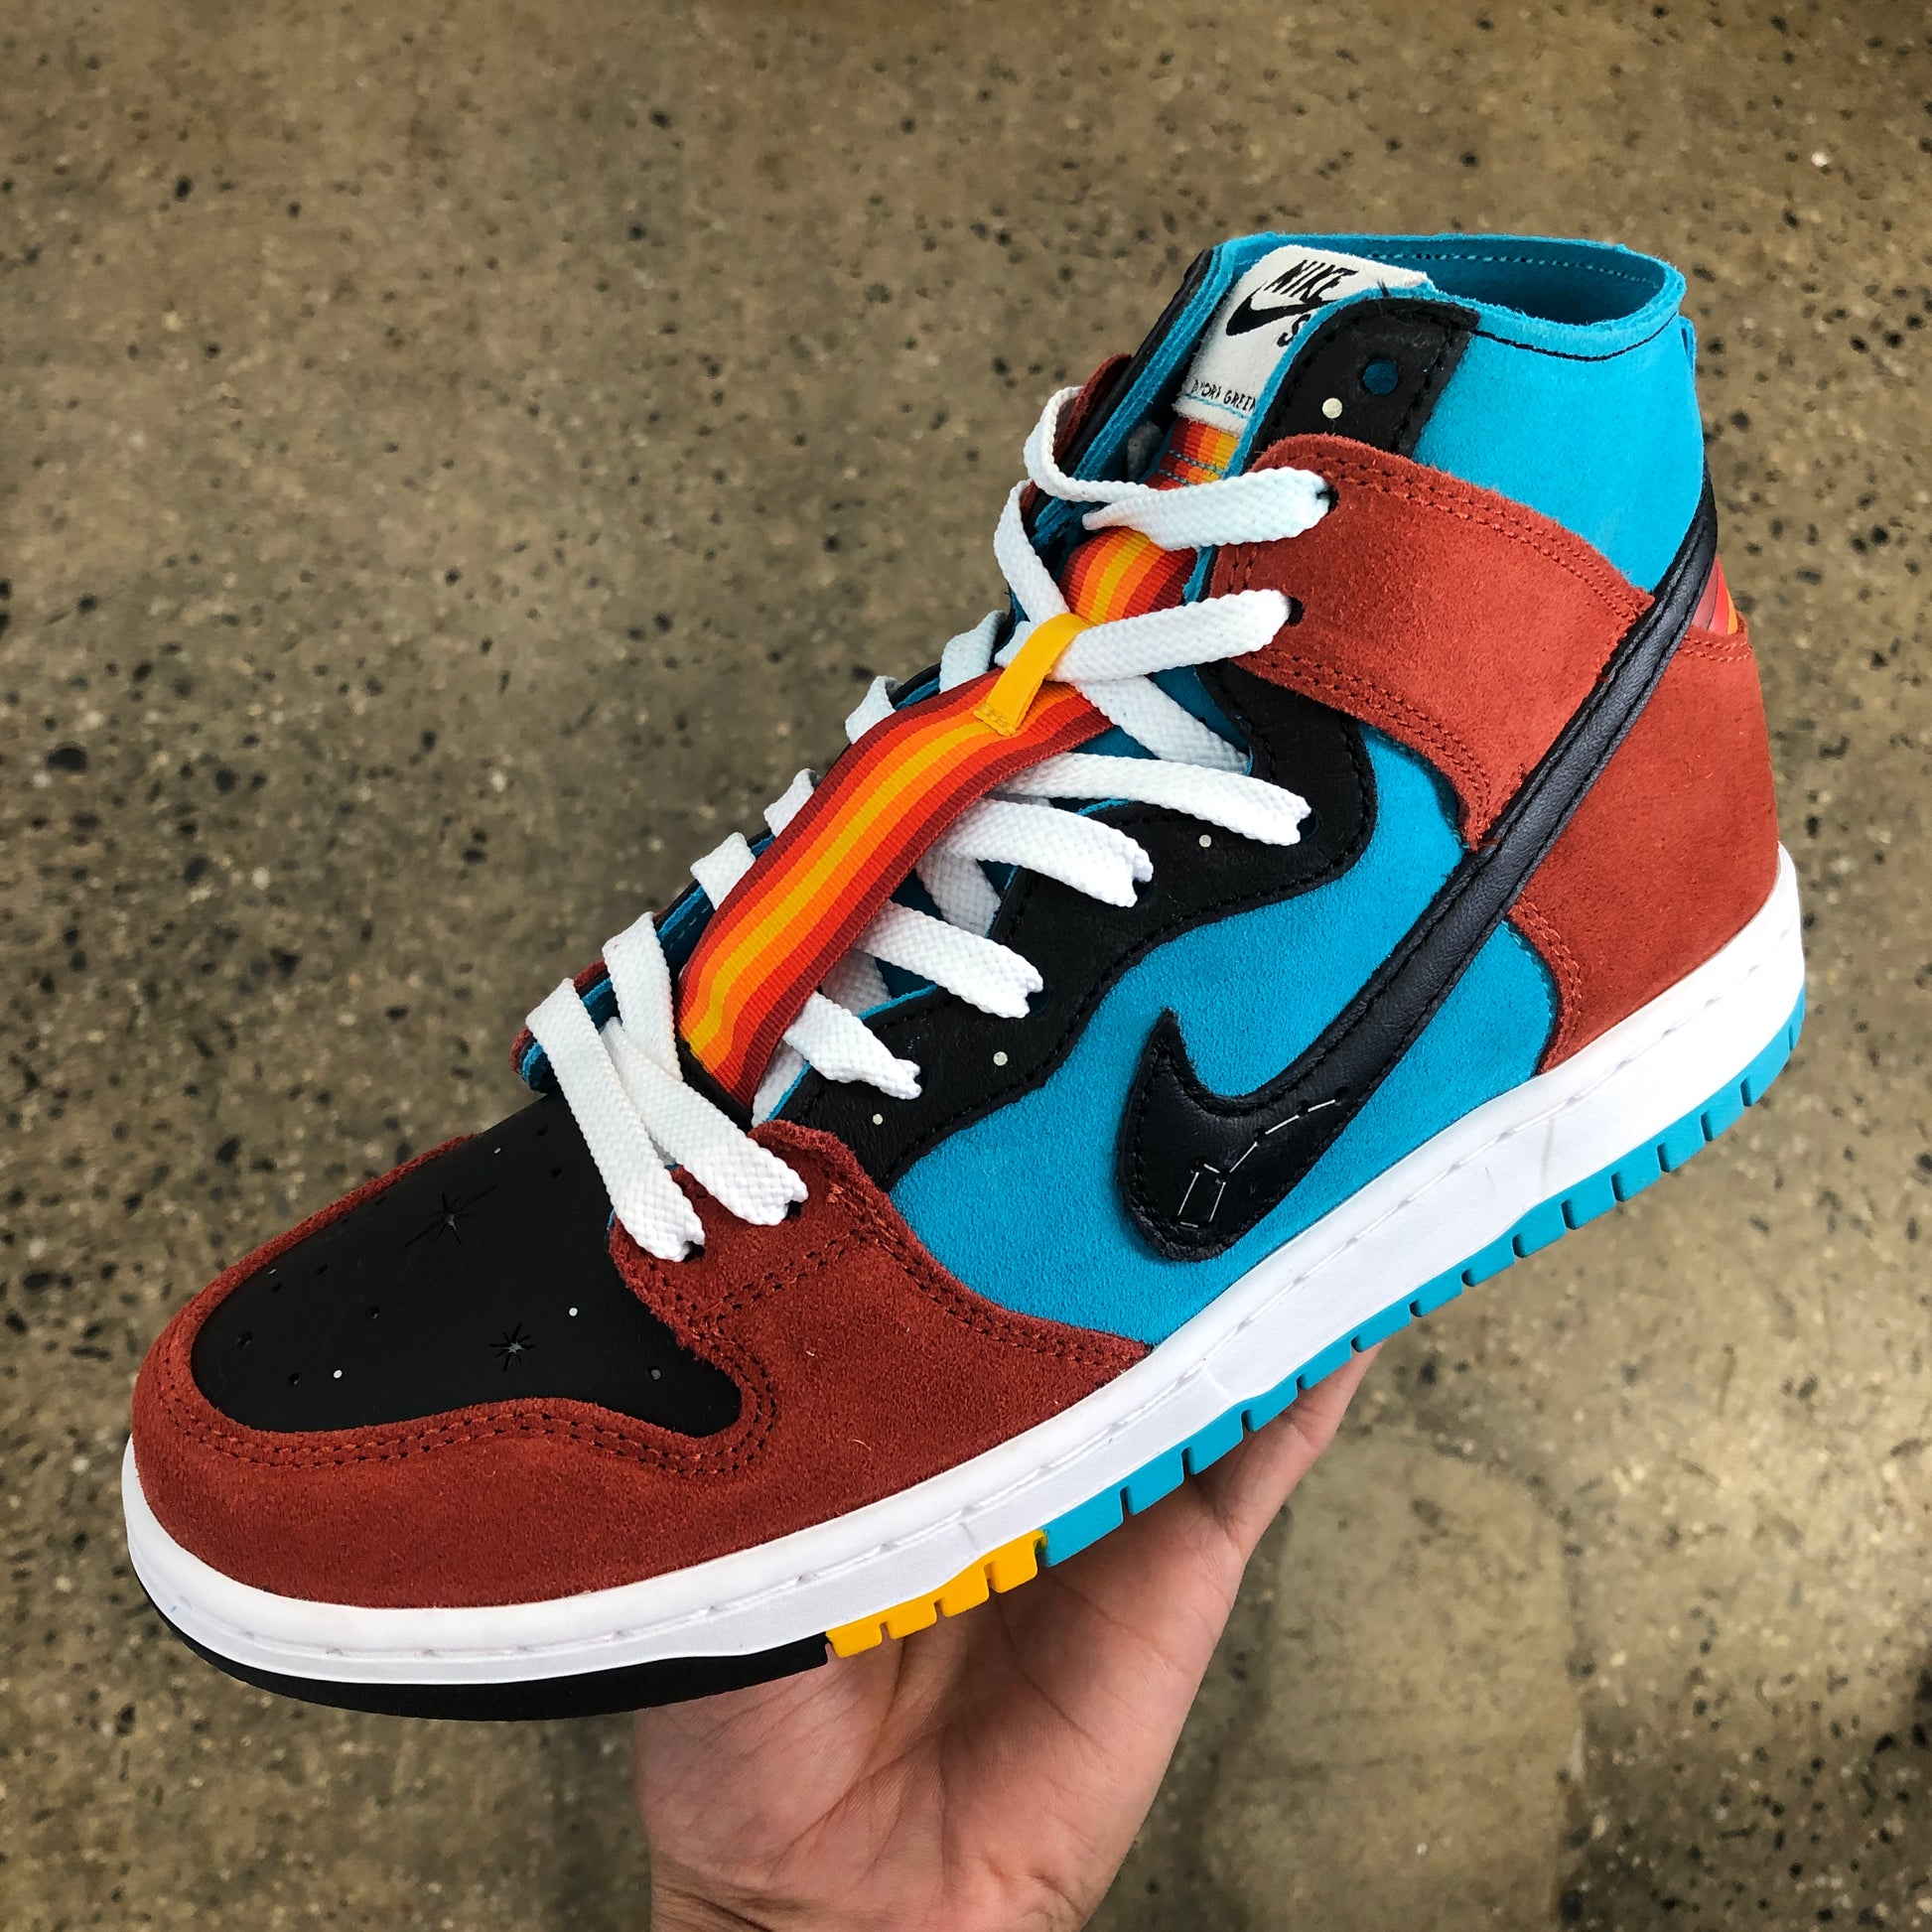 photo of a shoe with red and blue panels, a black nike swoosh, and white laces with a colorful lace protector